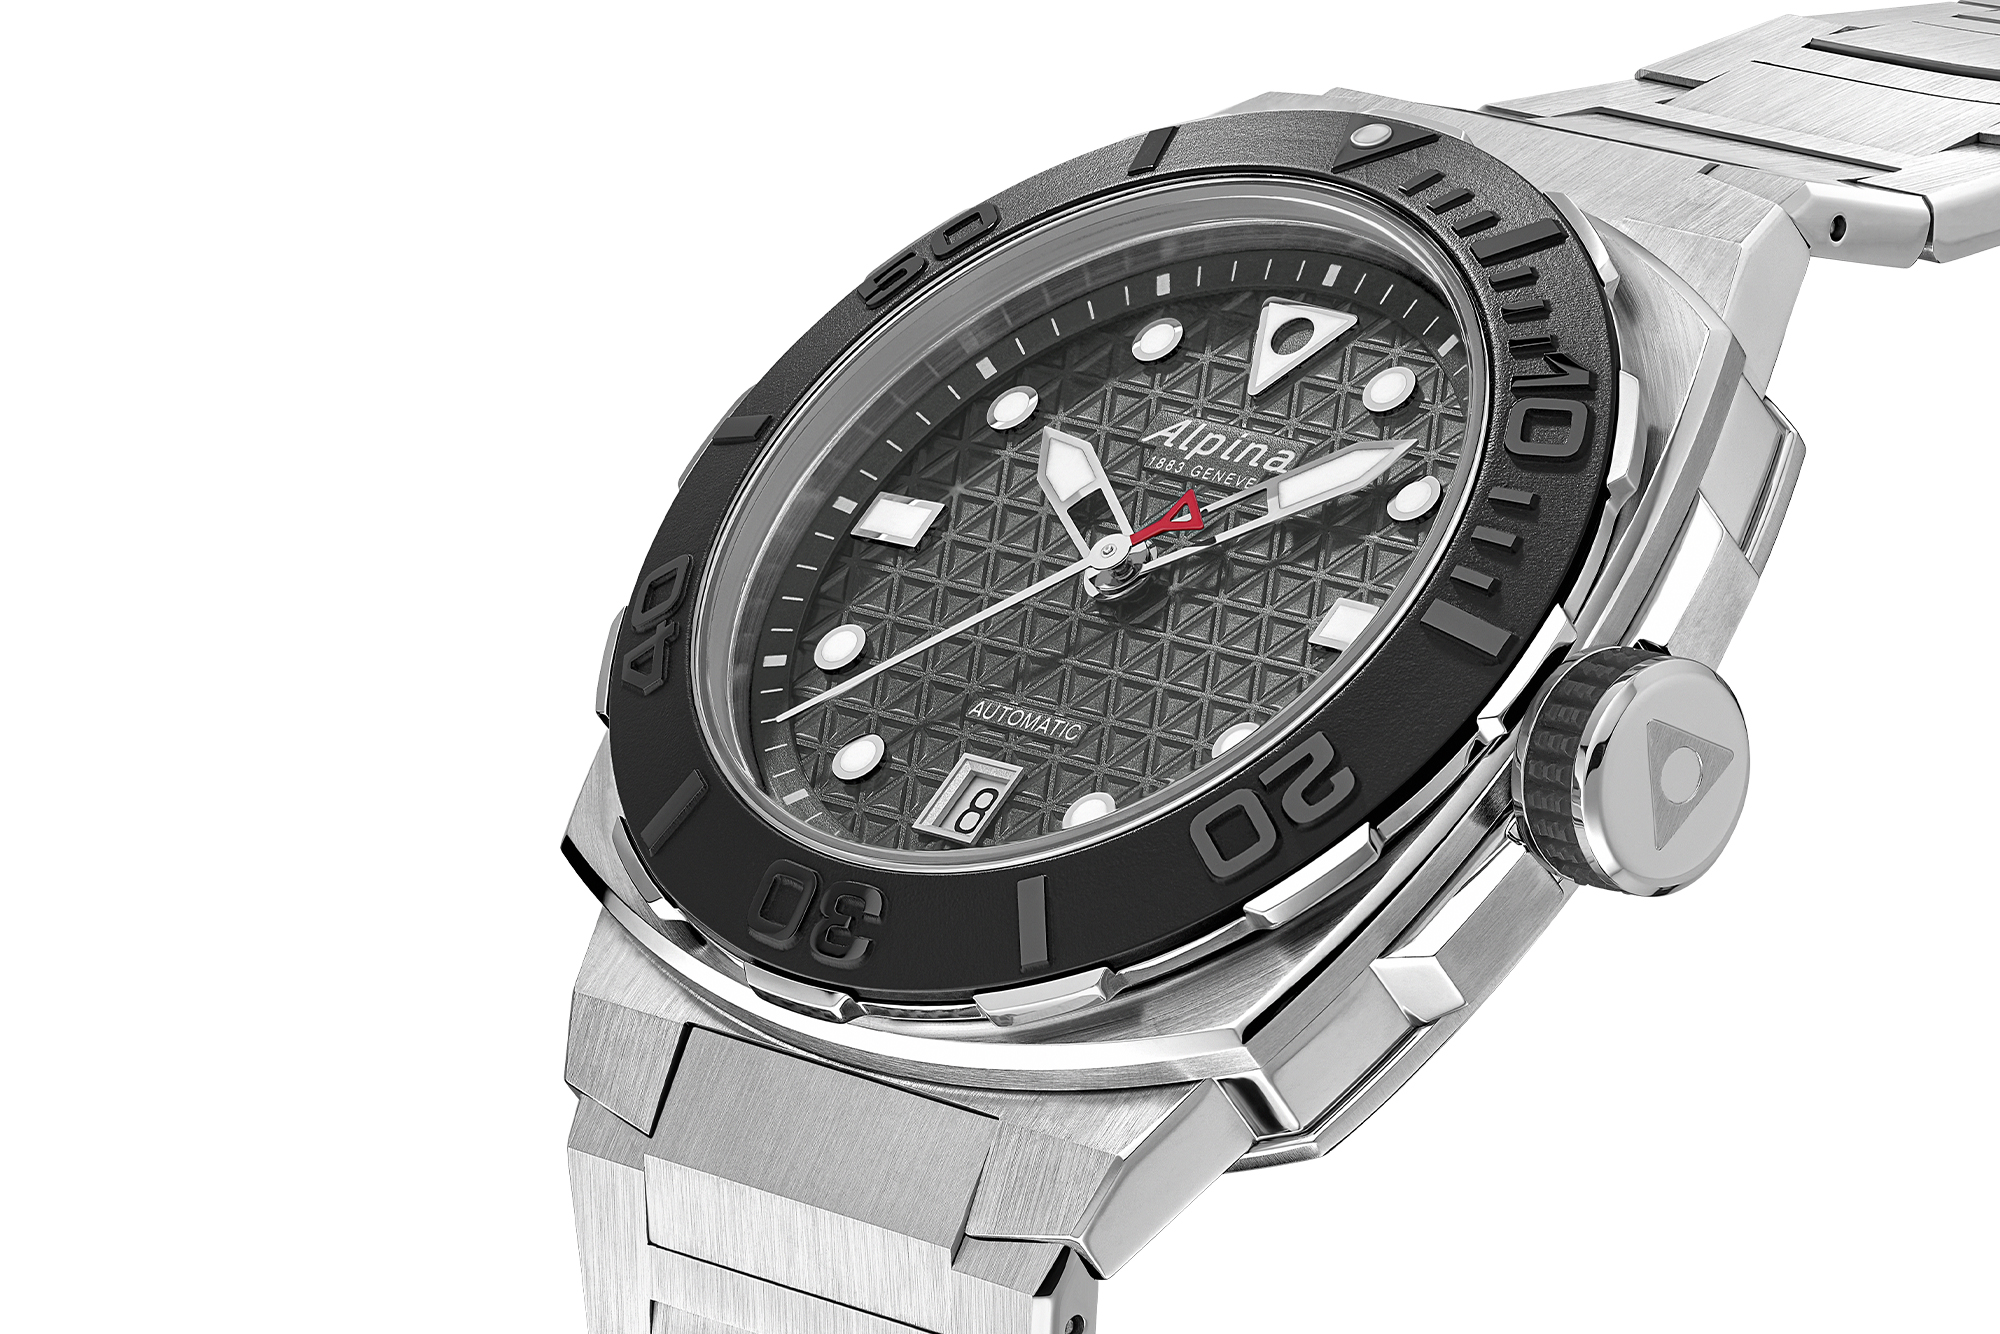 Alpina Seastrong Diver Extreme Automatic